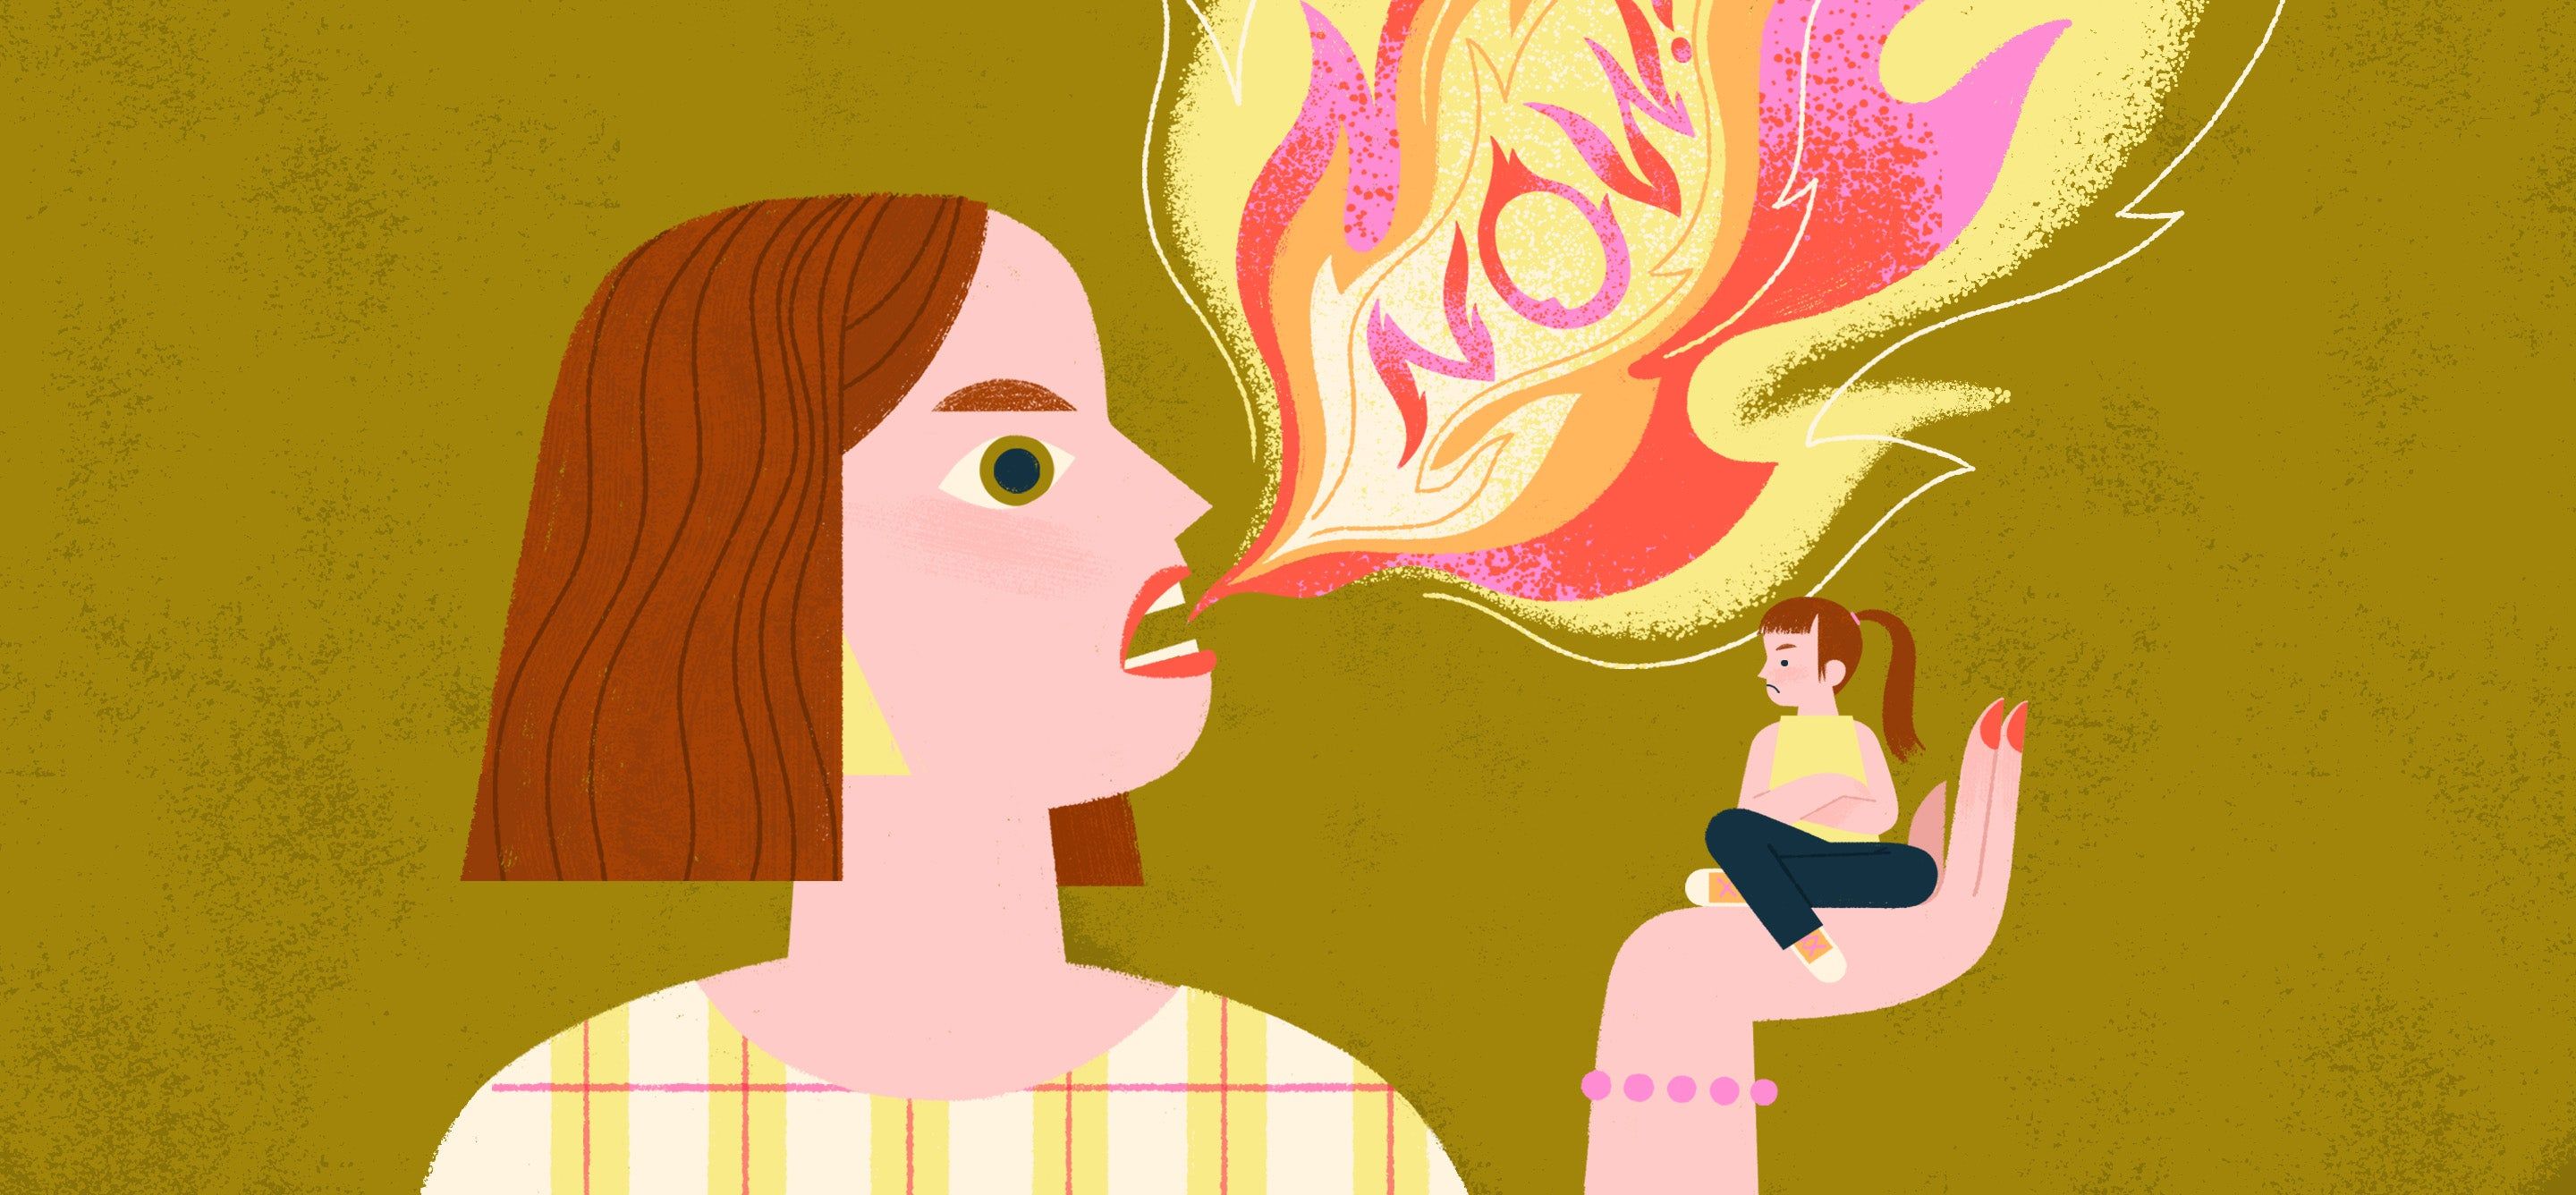 Illustration of a mother yelling with fire and the word now coming out of her mouth.